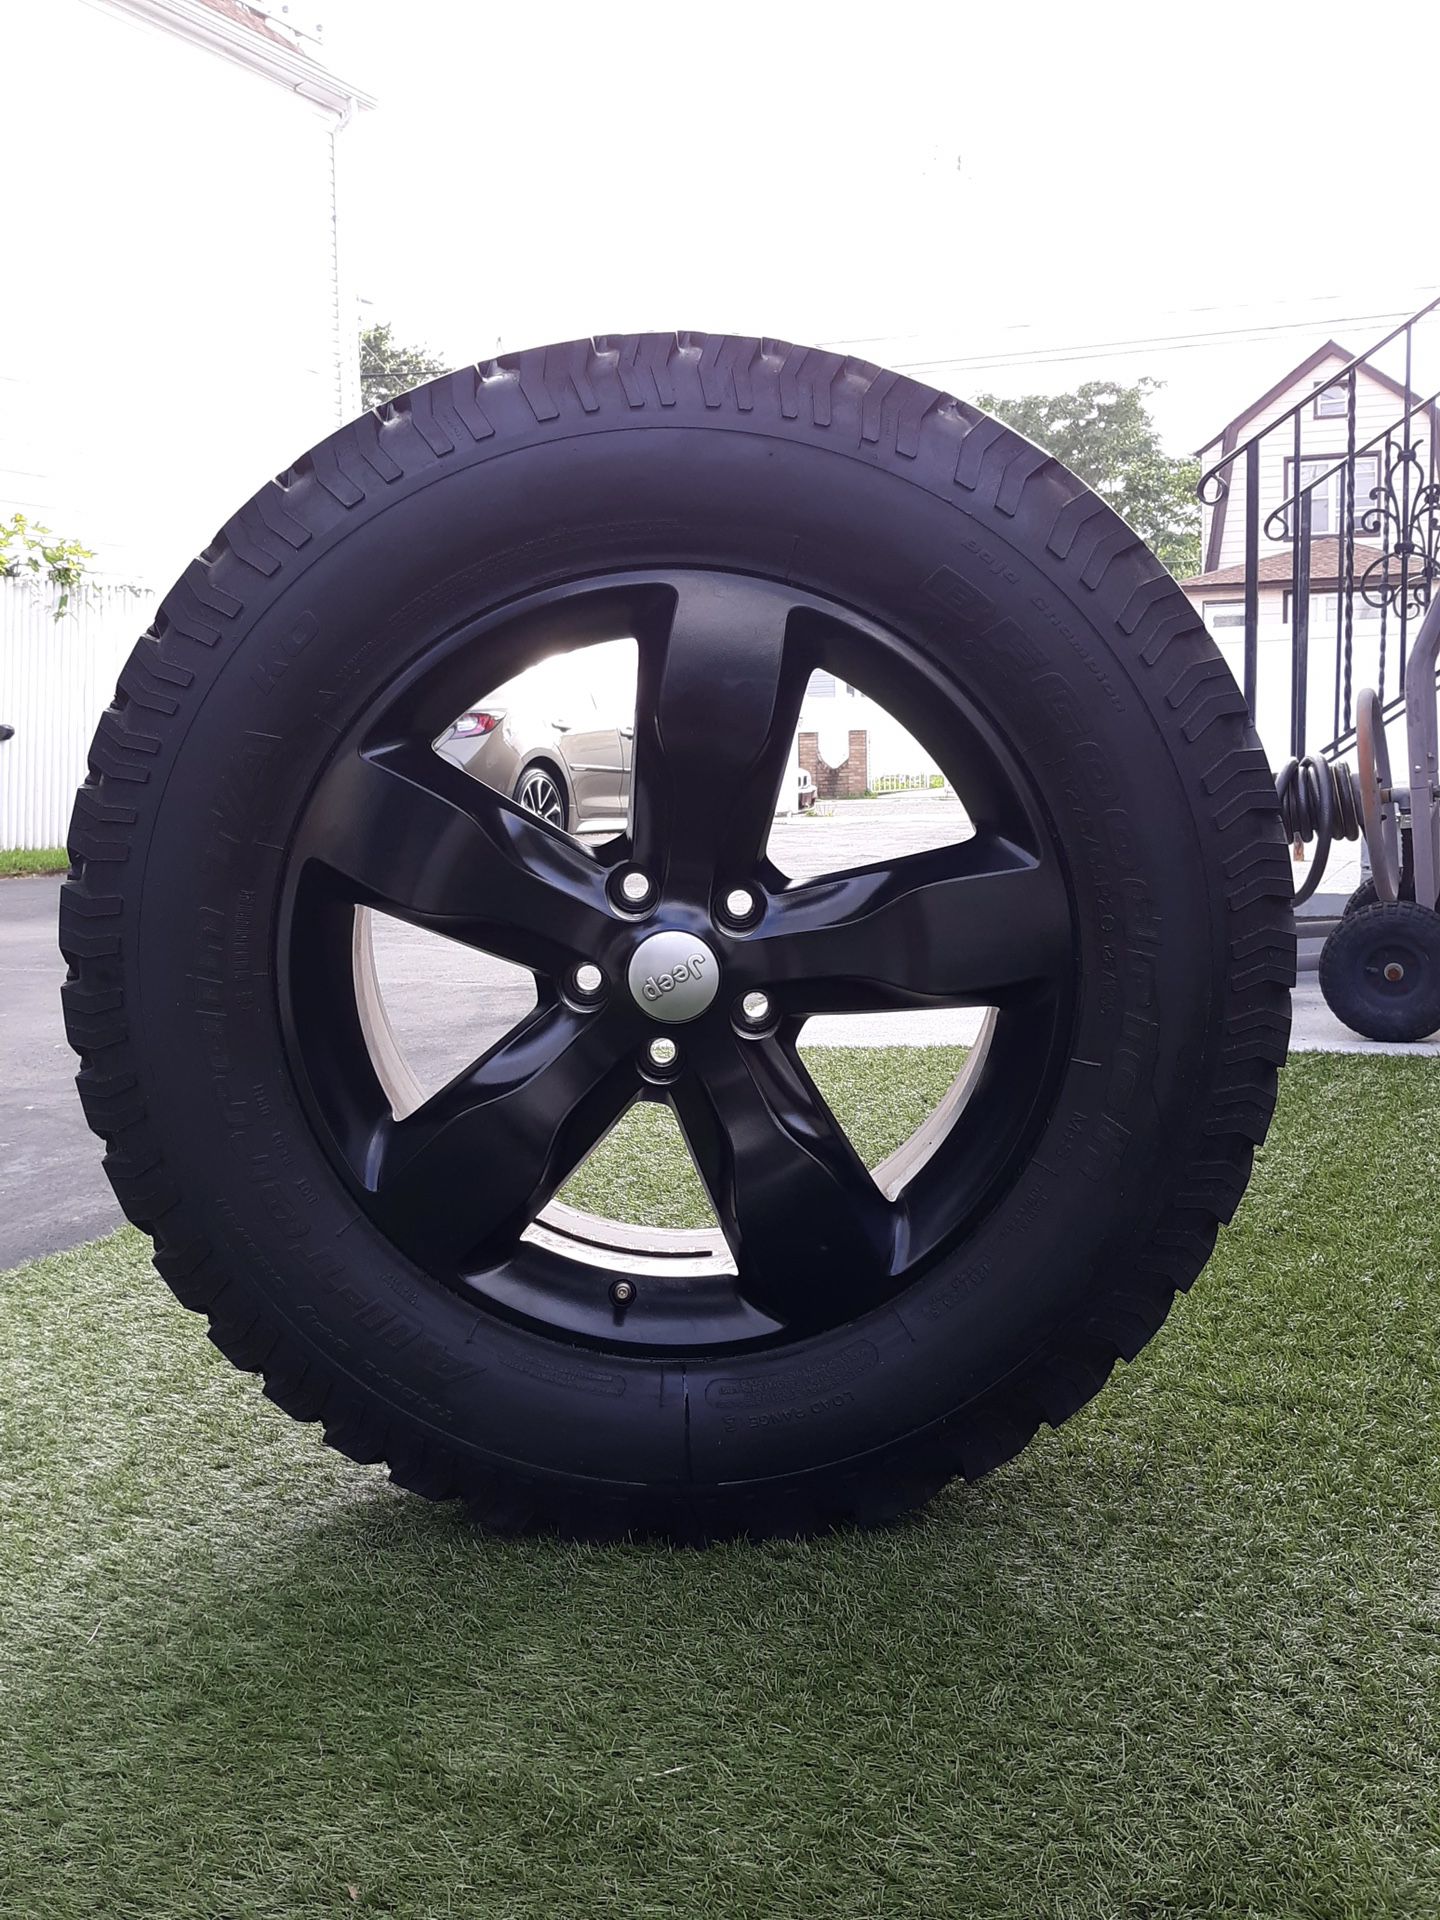 Jeep jeep wrangler wheels and bumper